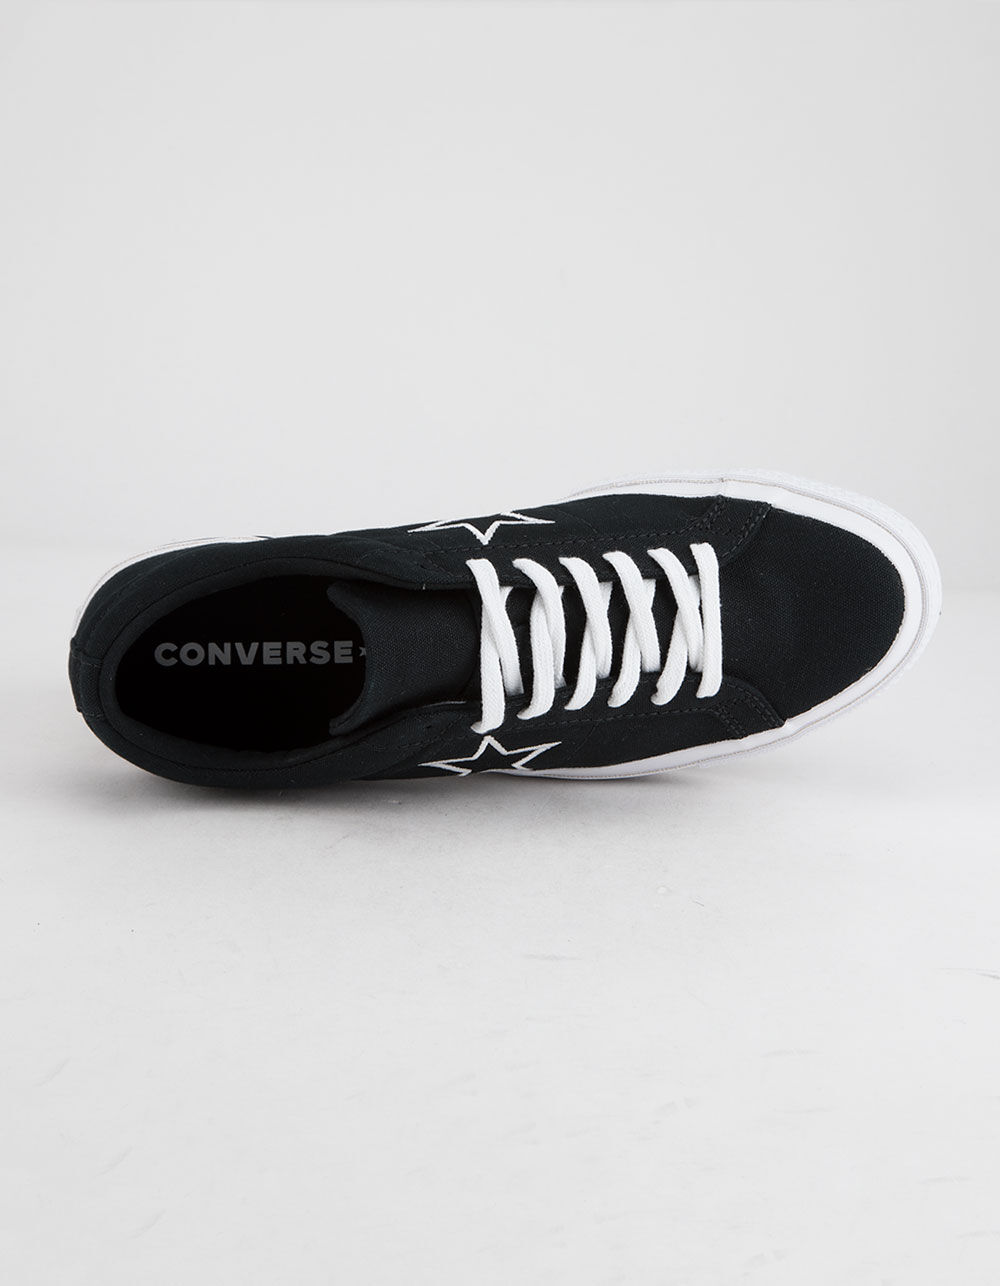 CONVERSE One Star Ox Black & White Low Top Shoes image number 2